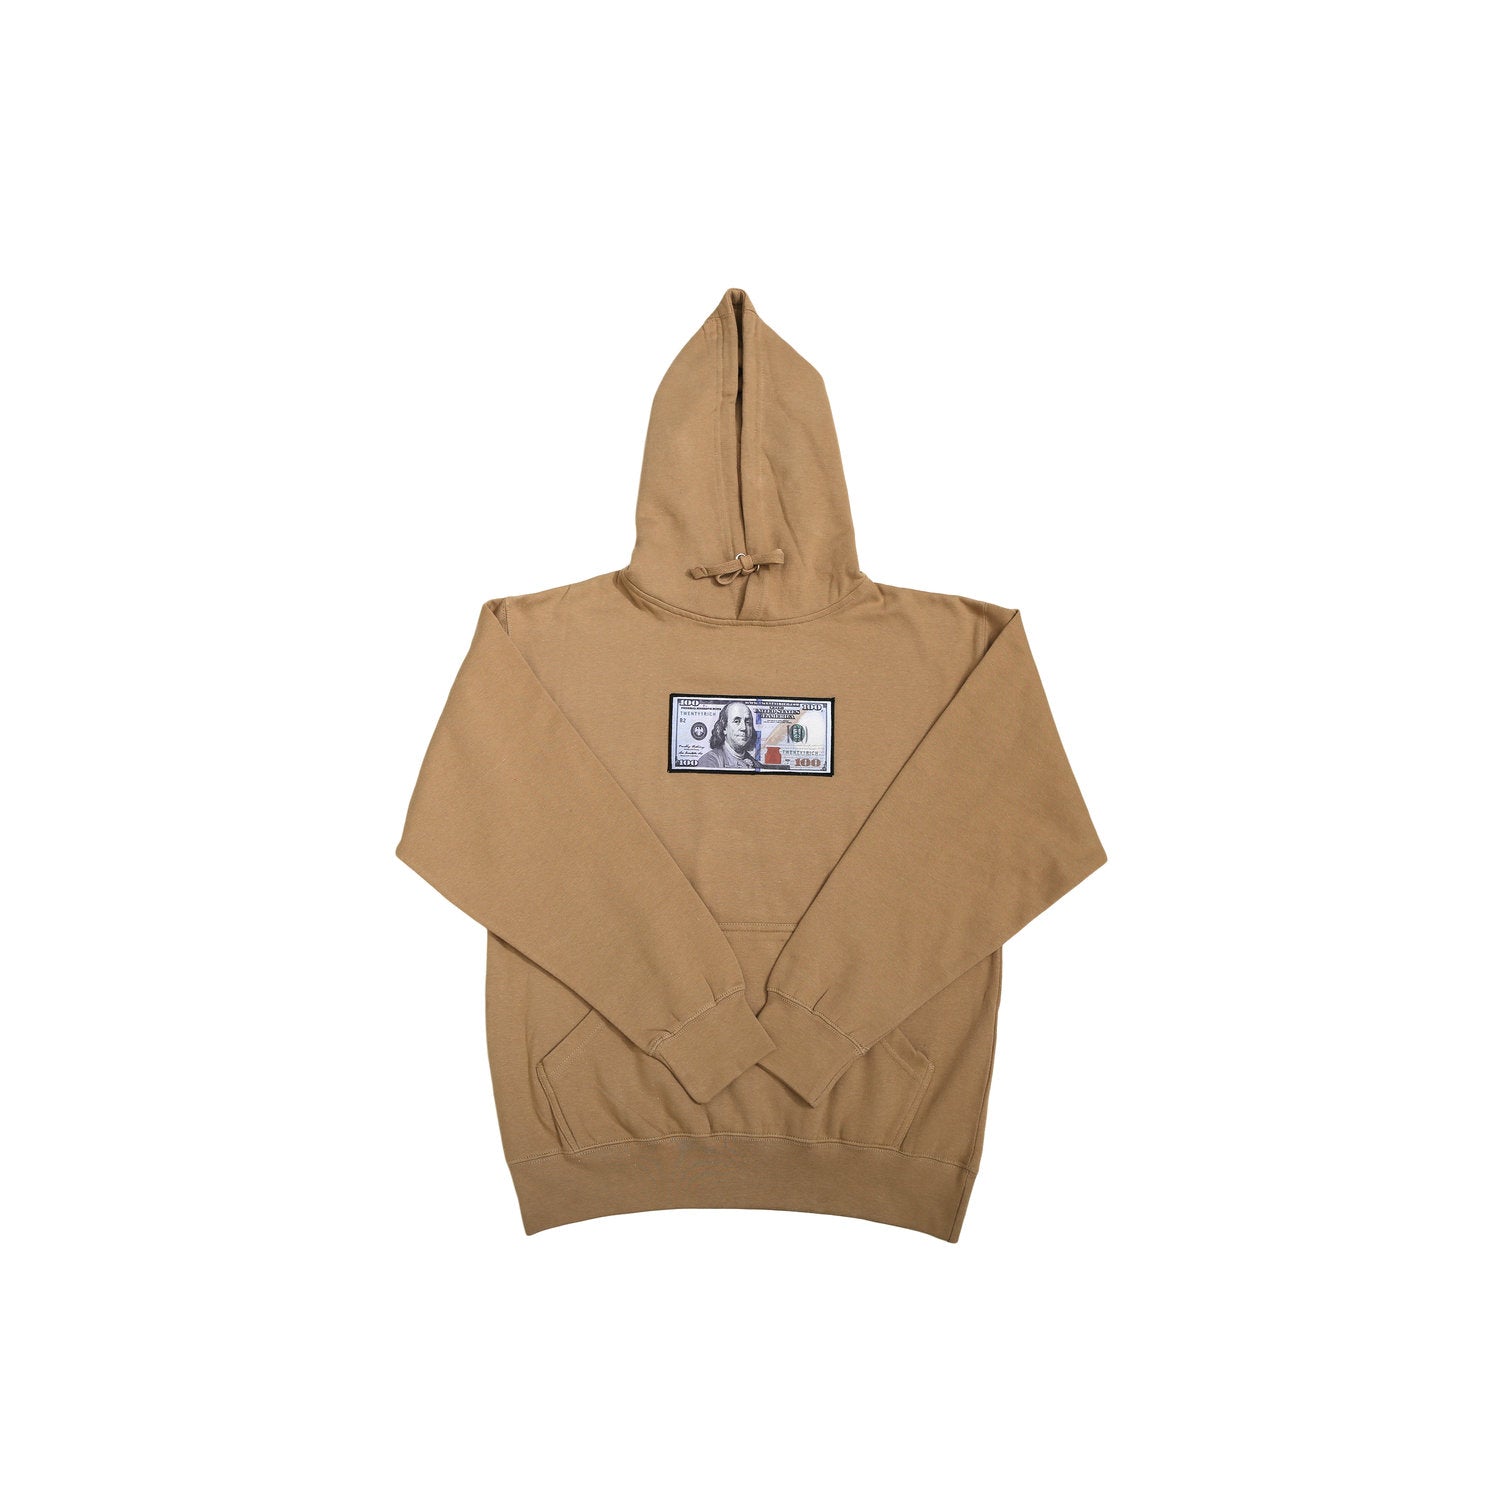 Sand Blue Hundreds Hoodie by Twenty1Rich with a $100 Blue Hundred Dollar Bill logo, Front Kangaroo Pocket, Cotton, Polyester, and Drawstring Hood